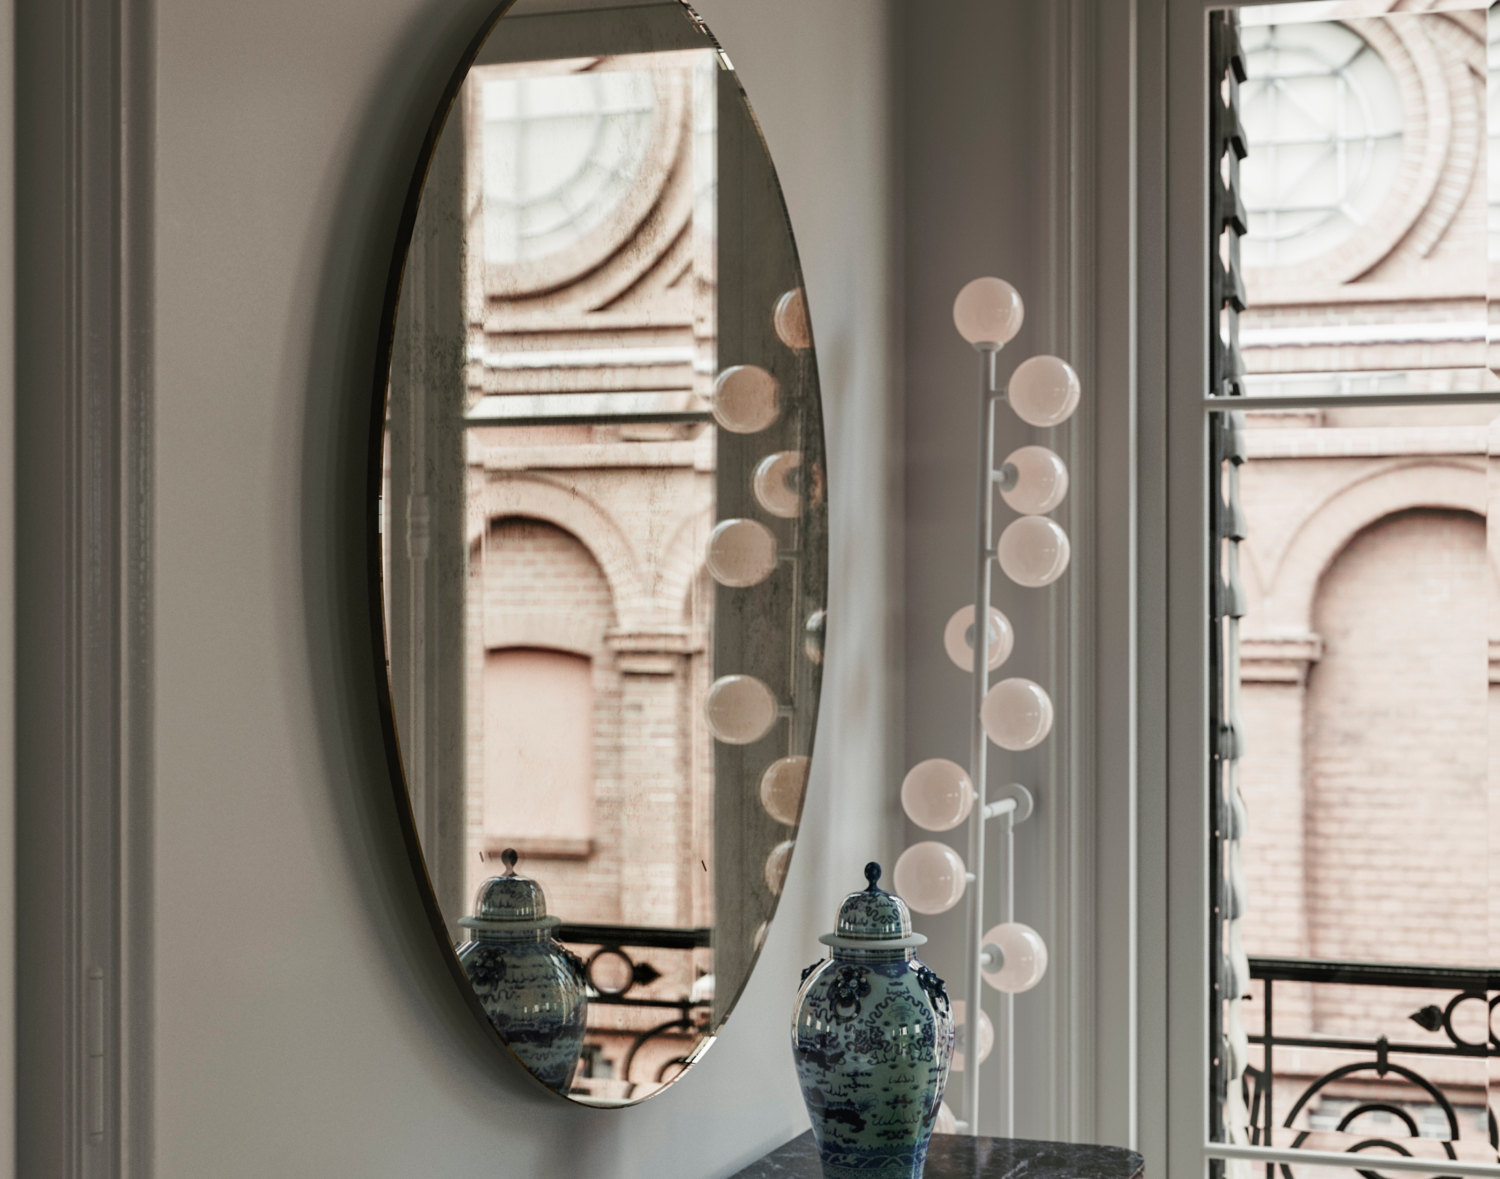  Sideview of Round Mirror hanging in New York residence 